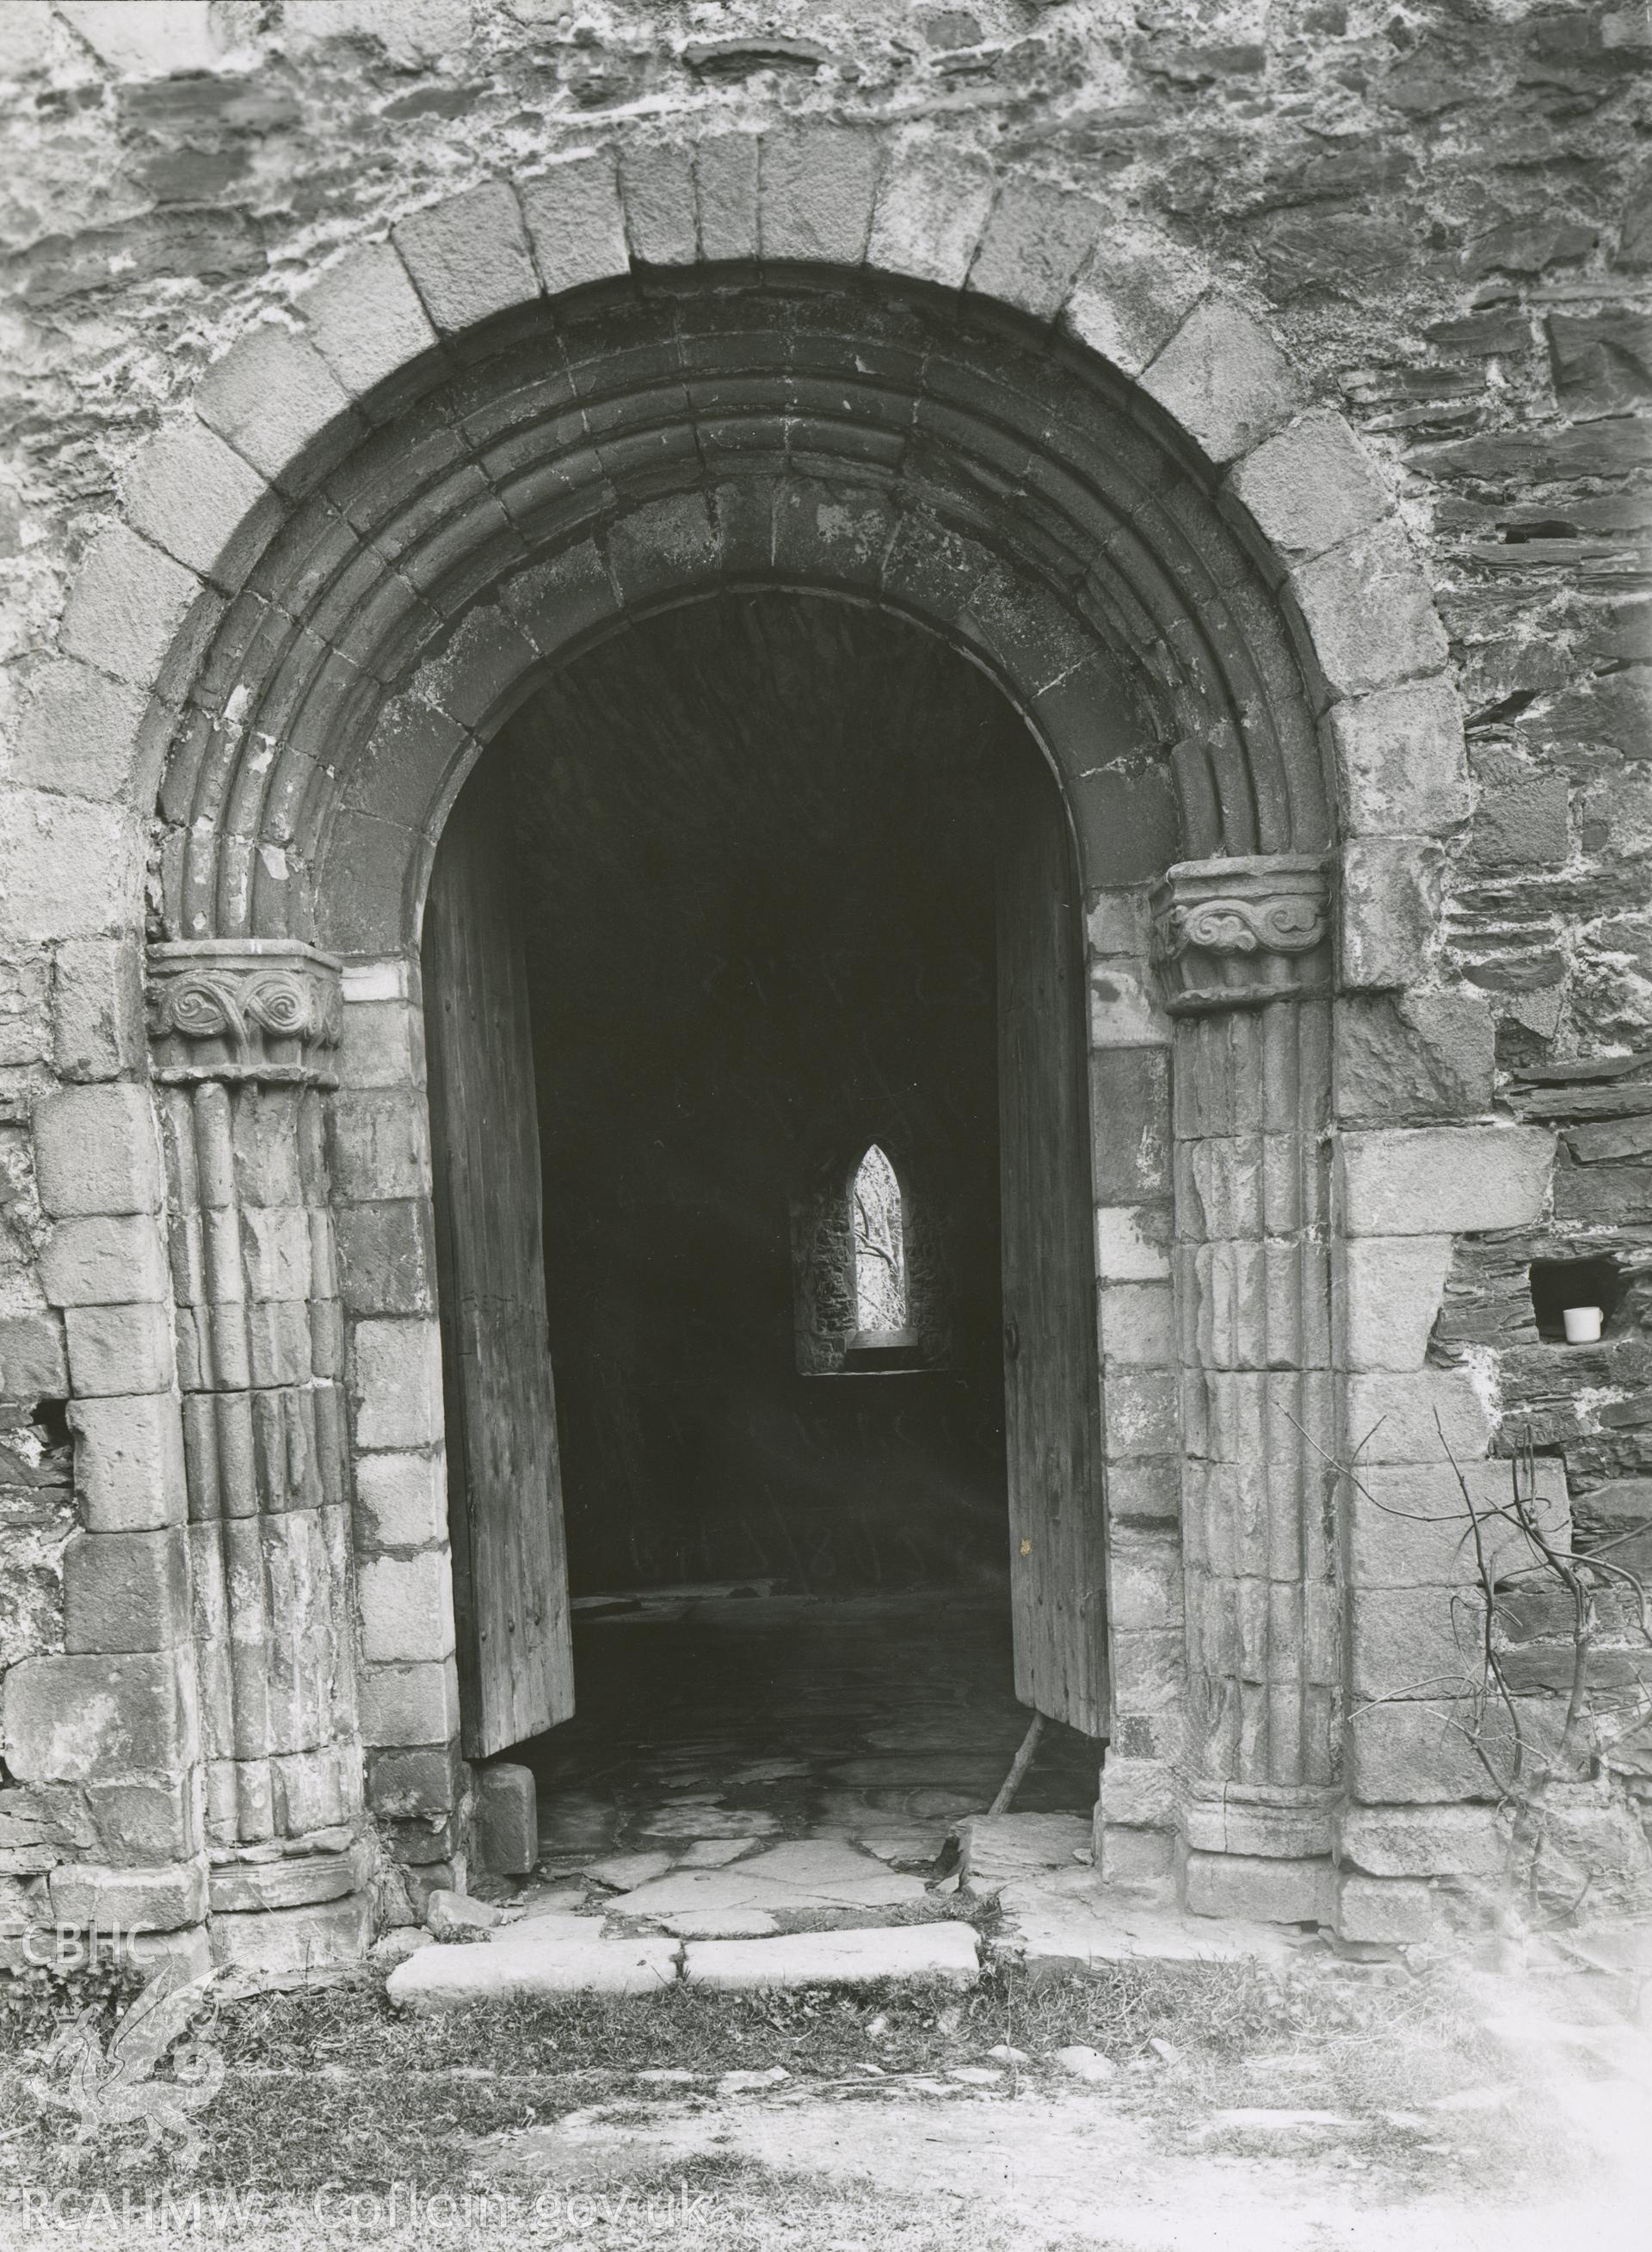 Digitised copy of a black and white photograph showing door to sacristy on east side of cloister at Valle Crucis Abbey, taken by F.H. Crossley, 1949. Copied from print as negative held by NMR England (Historic England)